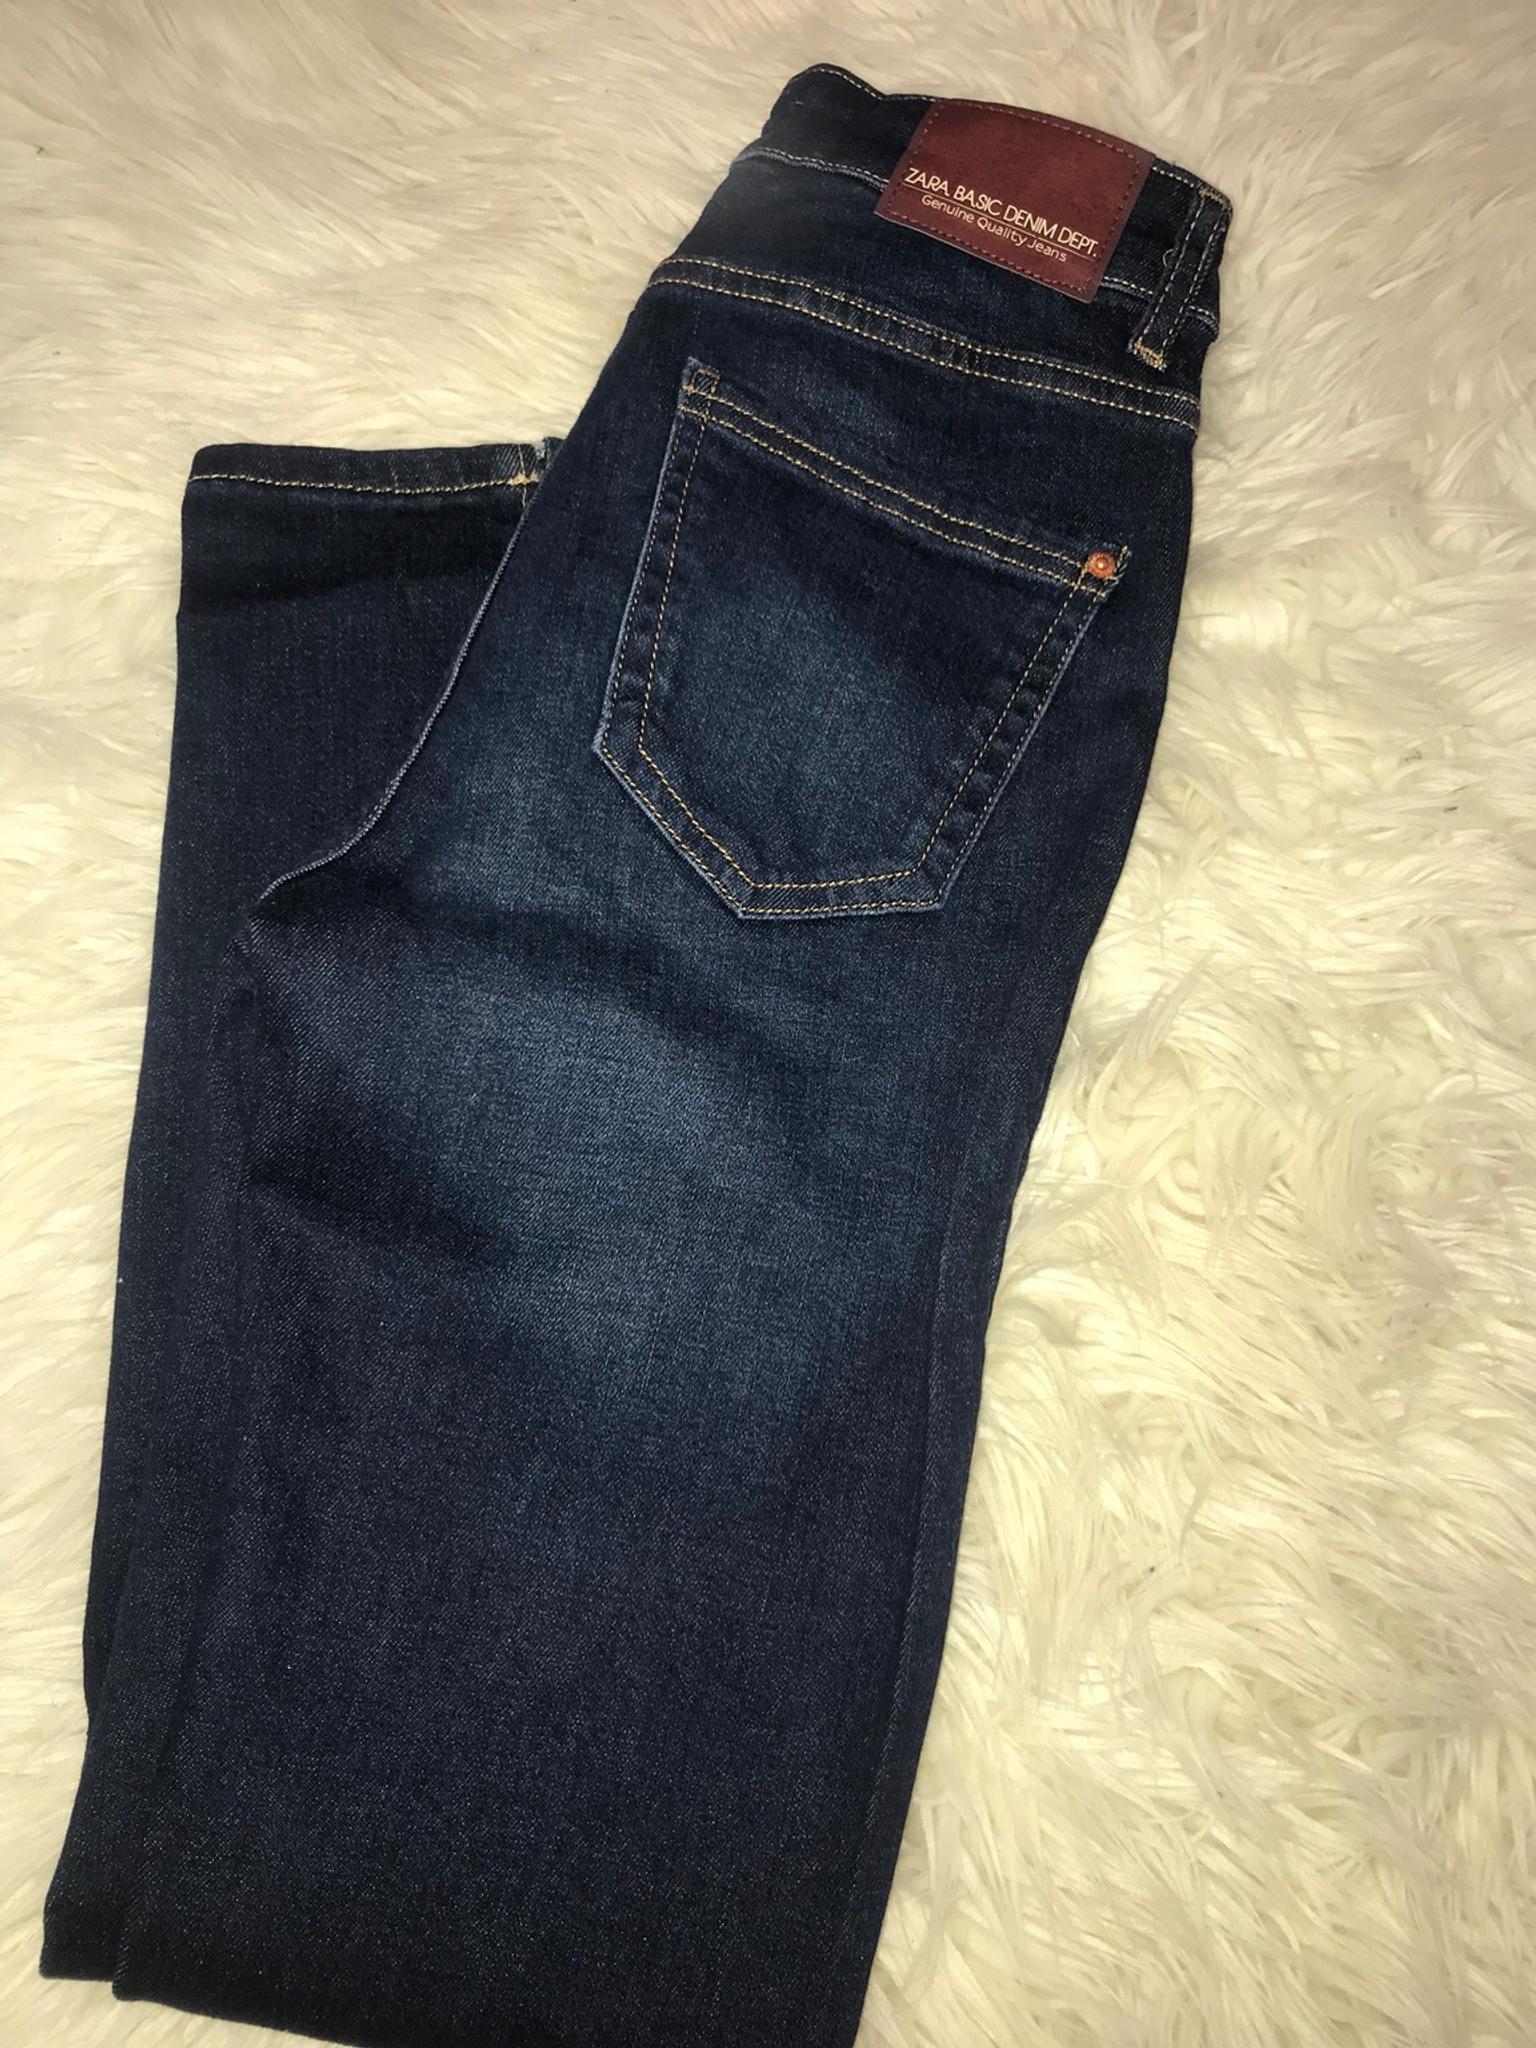 Zara jeans with tag in Blaby for £8.00 